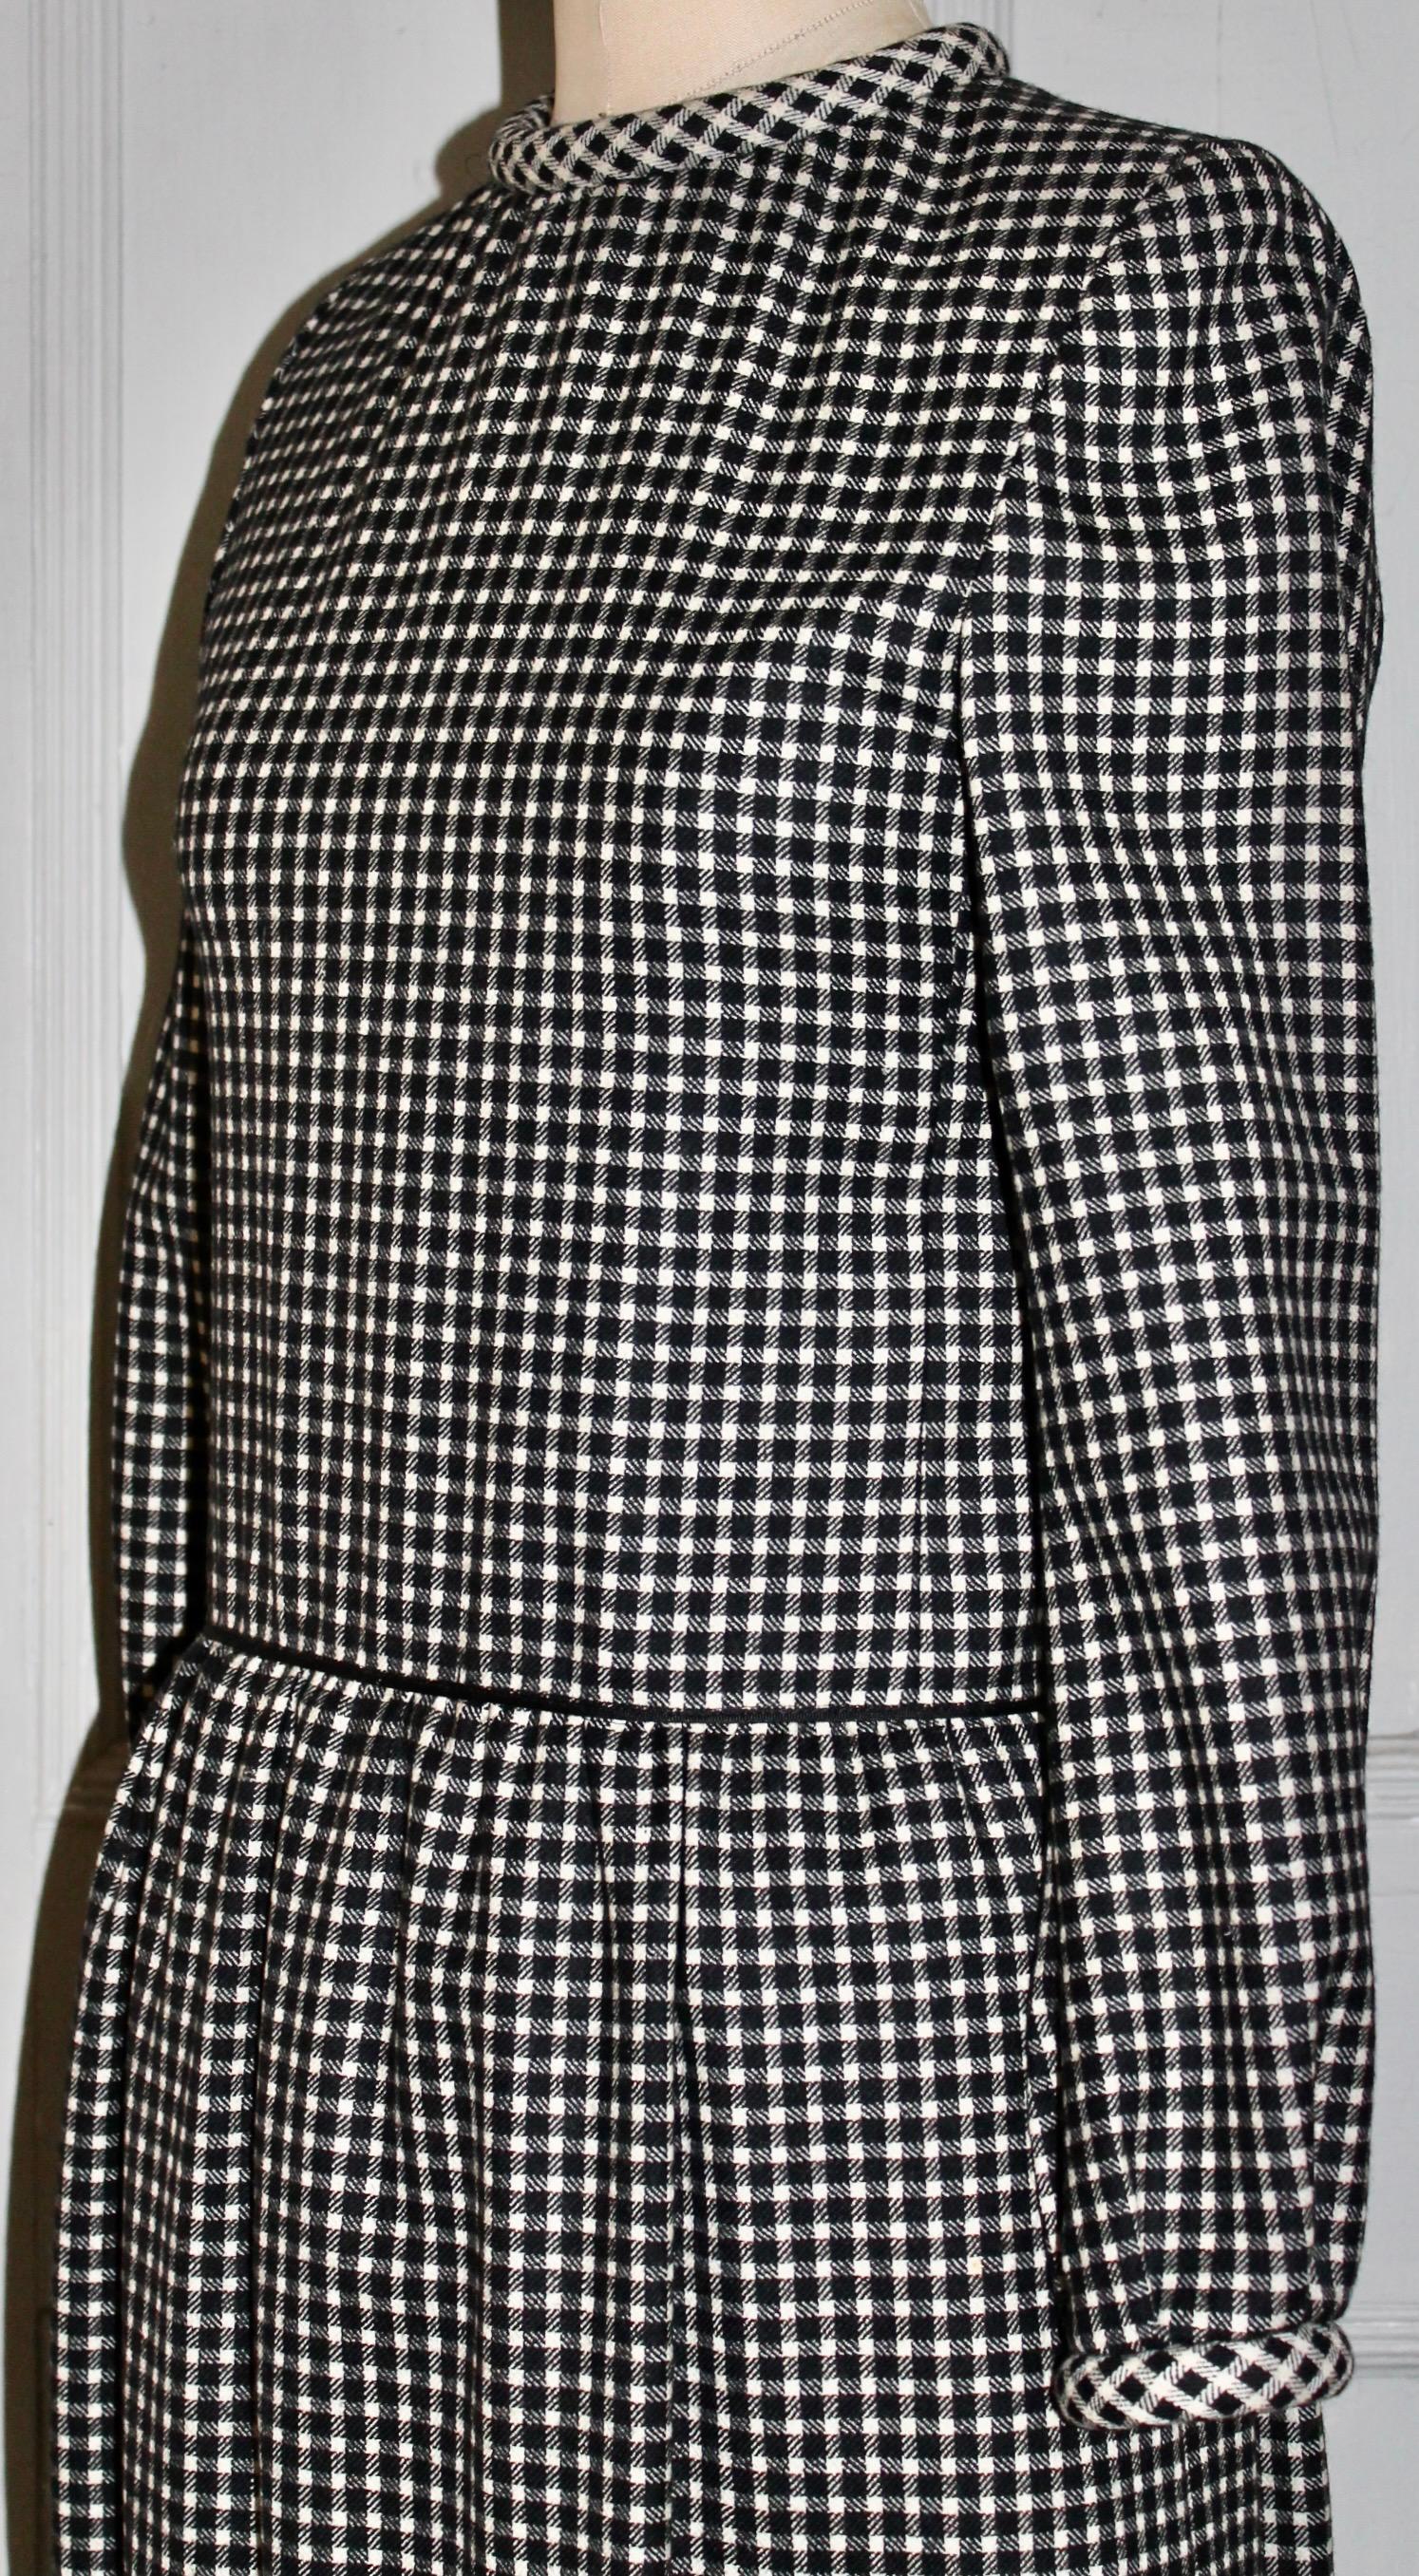 Nina Ricci 'Boutique' Paris Black and White Wool Dress In Excellent Condition For Sale In Sharon, CT